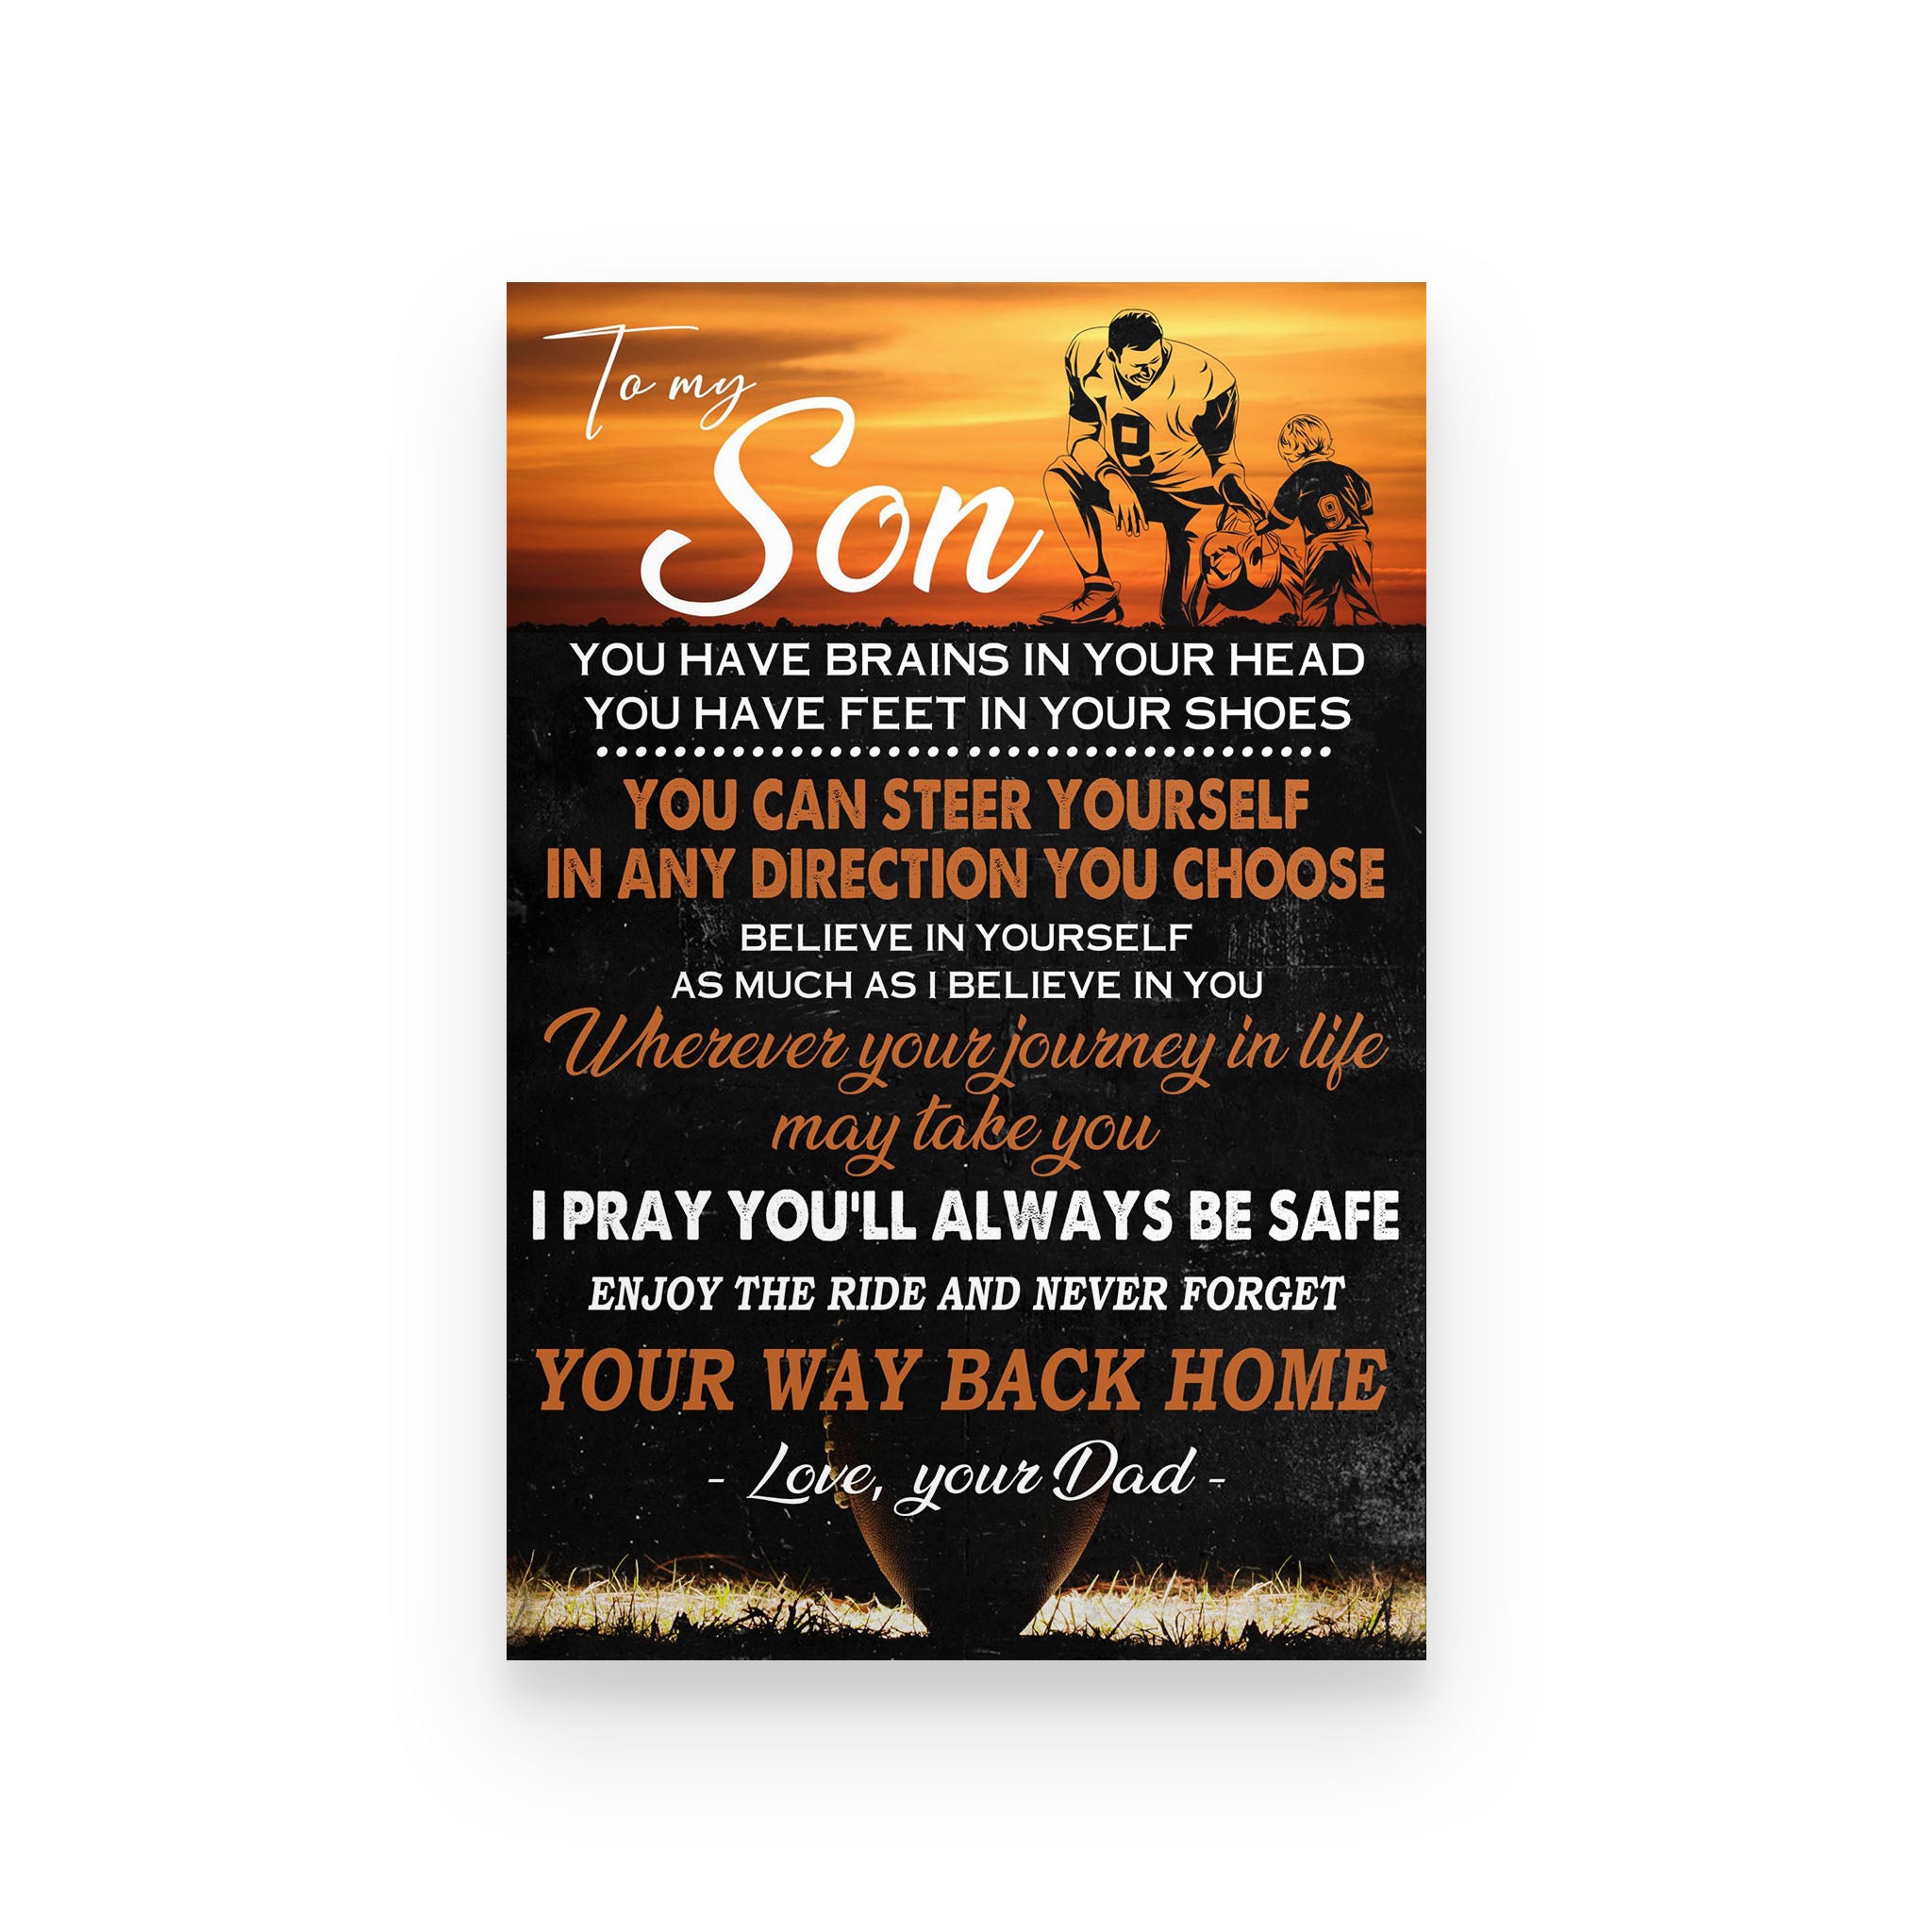 American football poster dad to son you have brains in your head